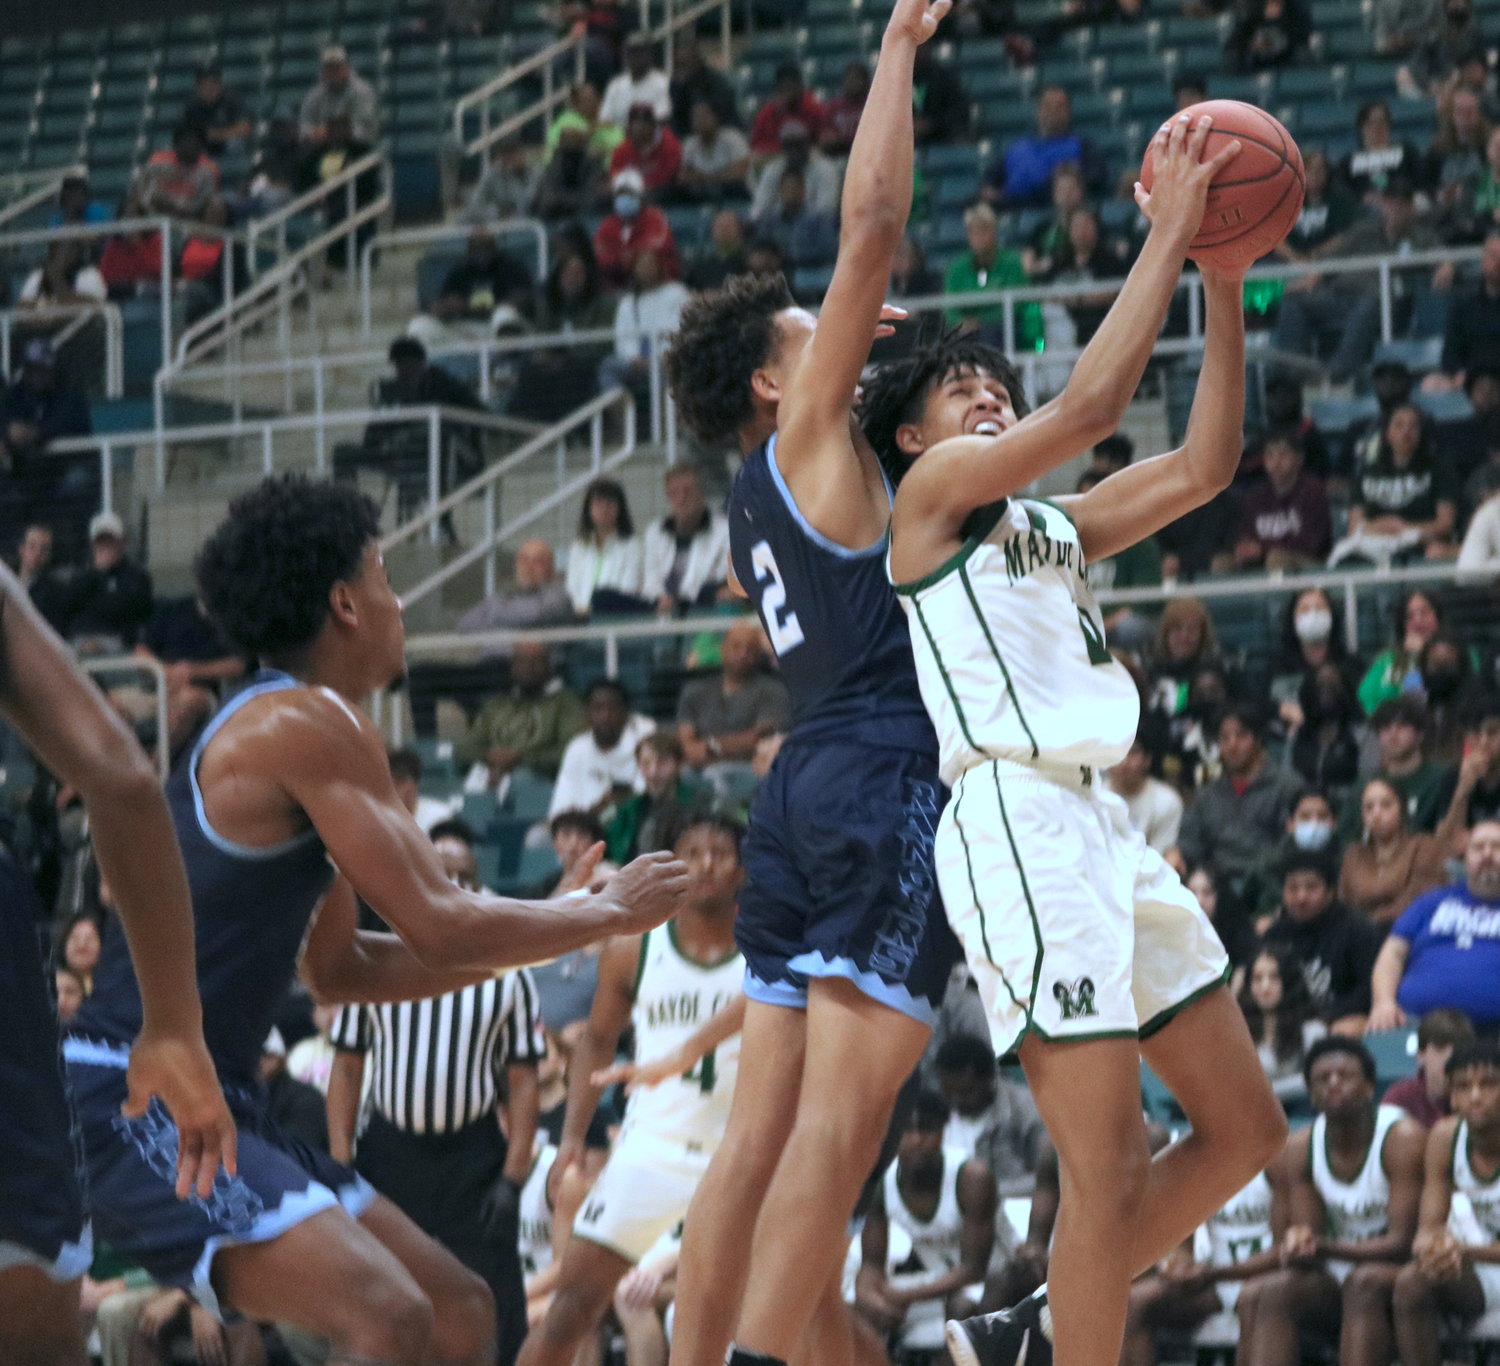 Larison LaMette fights through contact as he shoots a layup during Tuesday’s Class 6A regional quarterfinal between Mayde Creek and Fort Bend Clements at the Merrell Center.